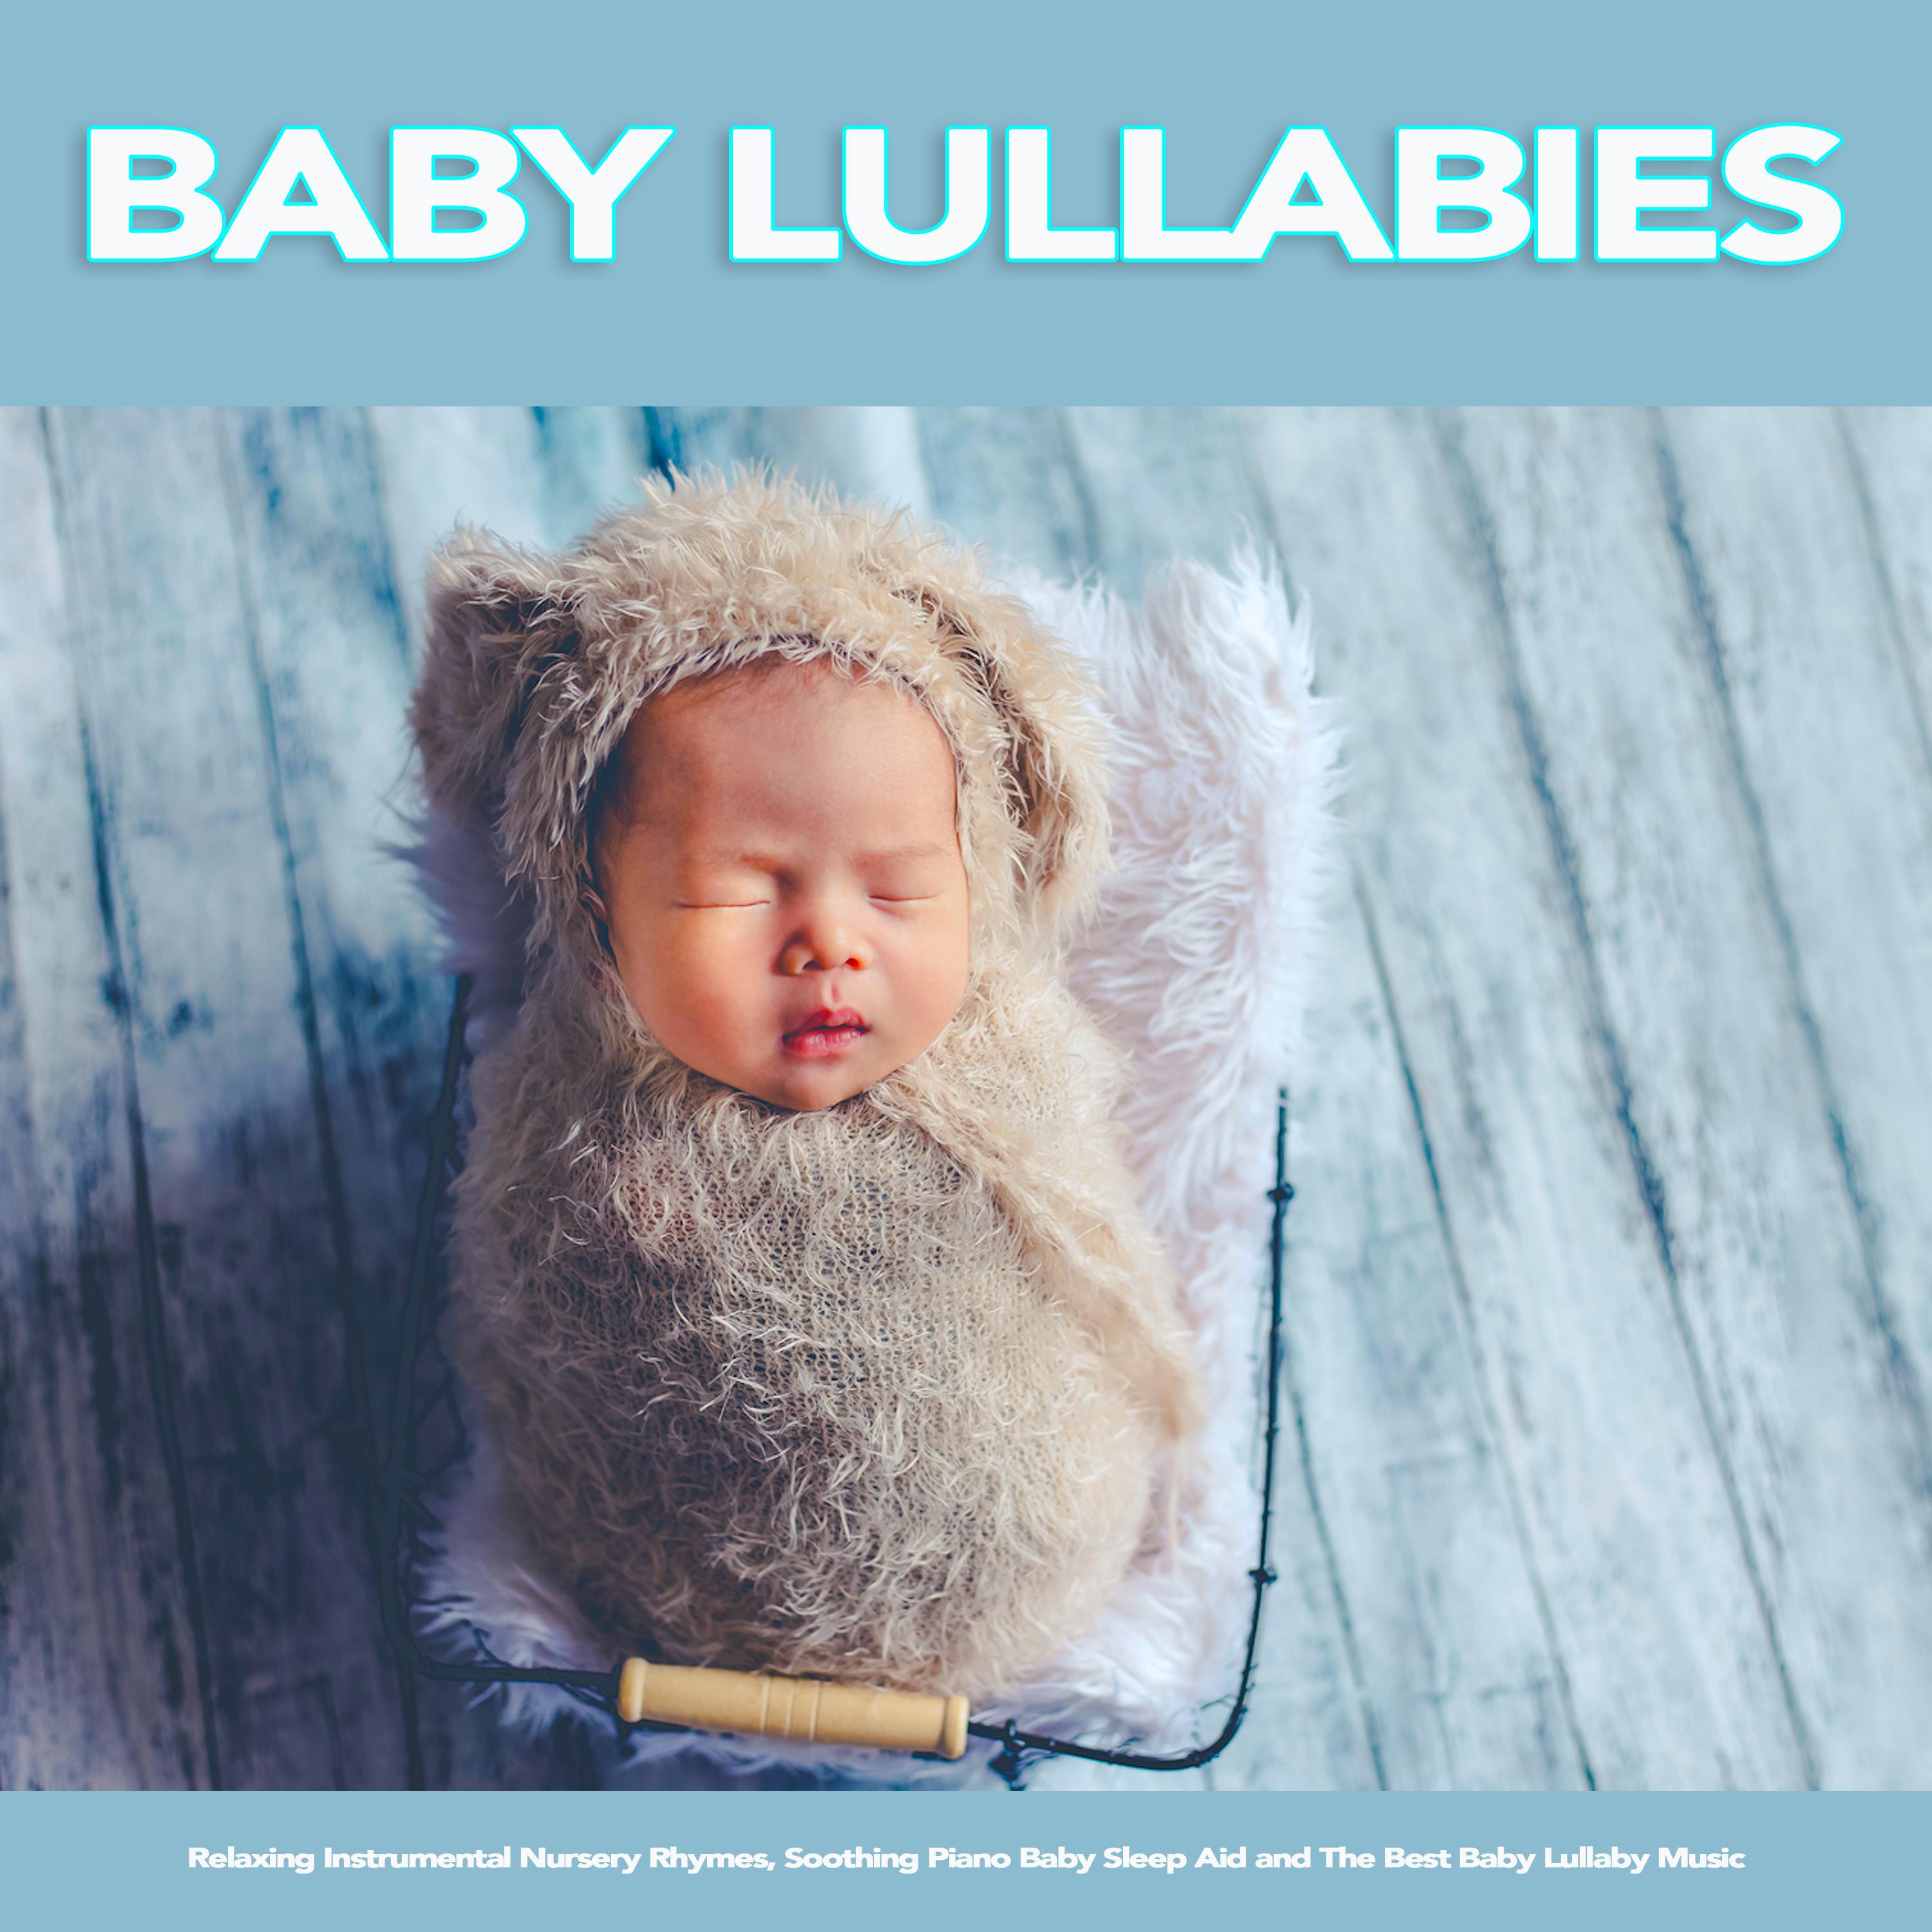 Baby Lullabies: Relaxing Instrumental Nursery Rhymes, Soothing Piano Baby Sleep Aid and The Best Baby Lullaby Music